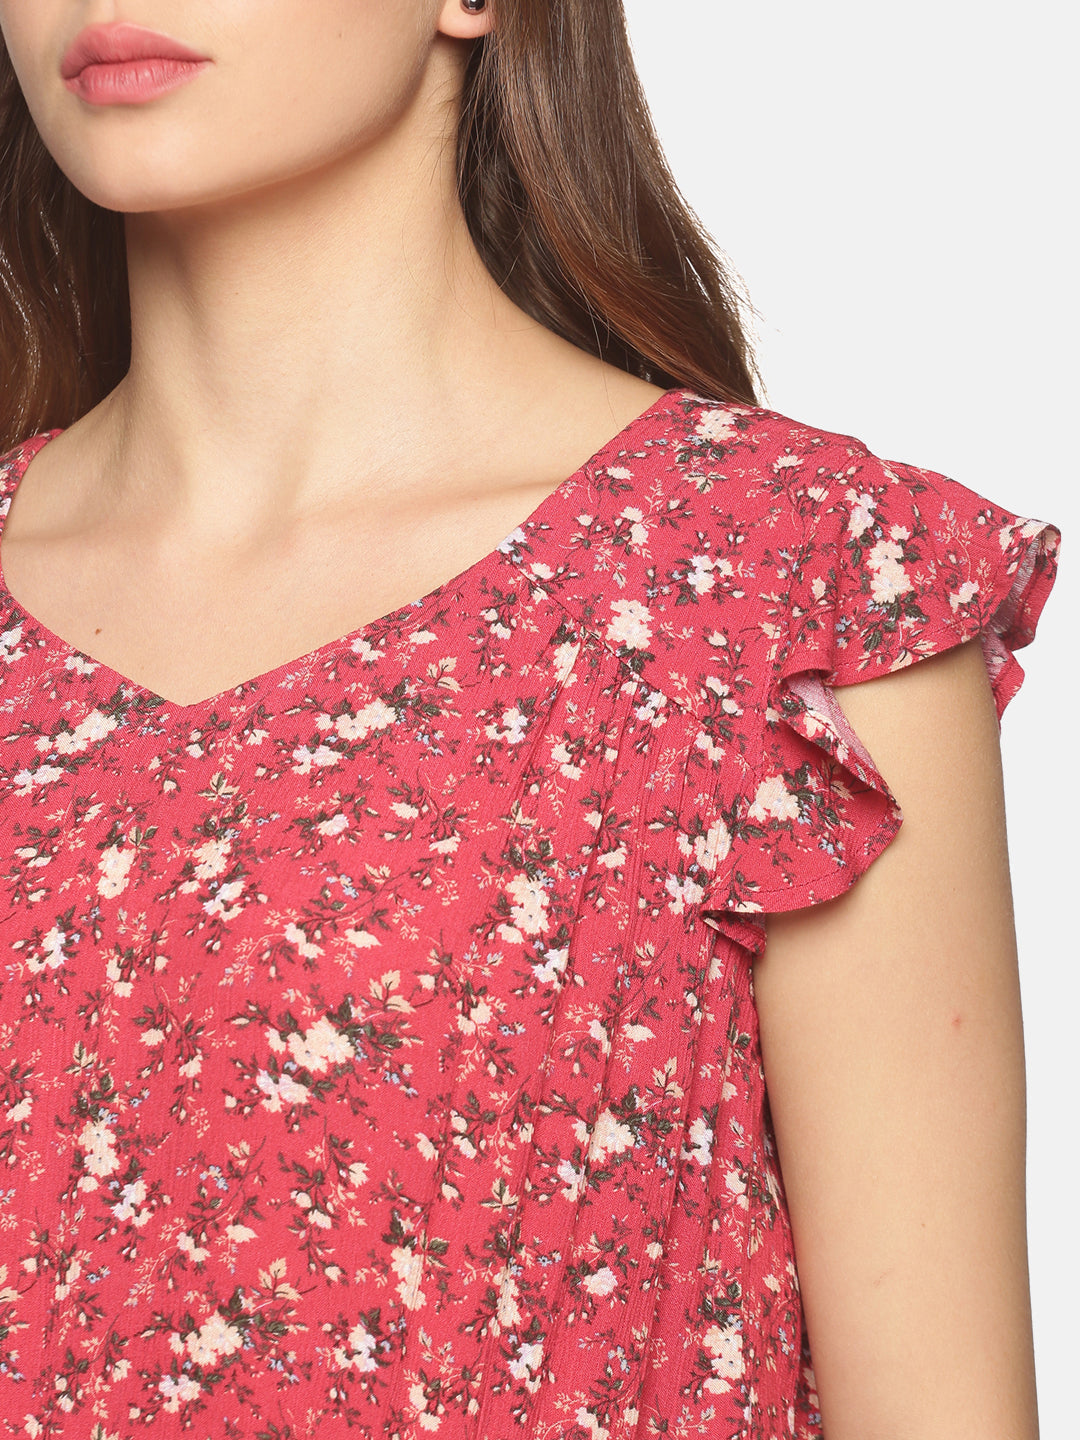 Red Cotton Floral Printed Peplum Top with Frill Sleeves & Waist Tie-up